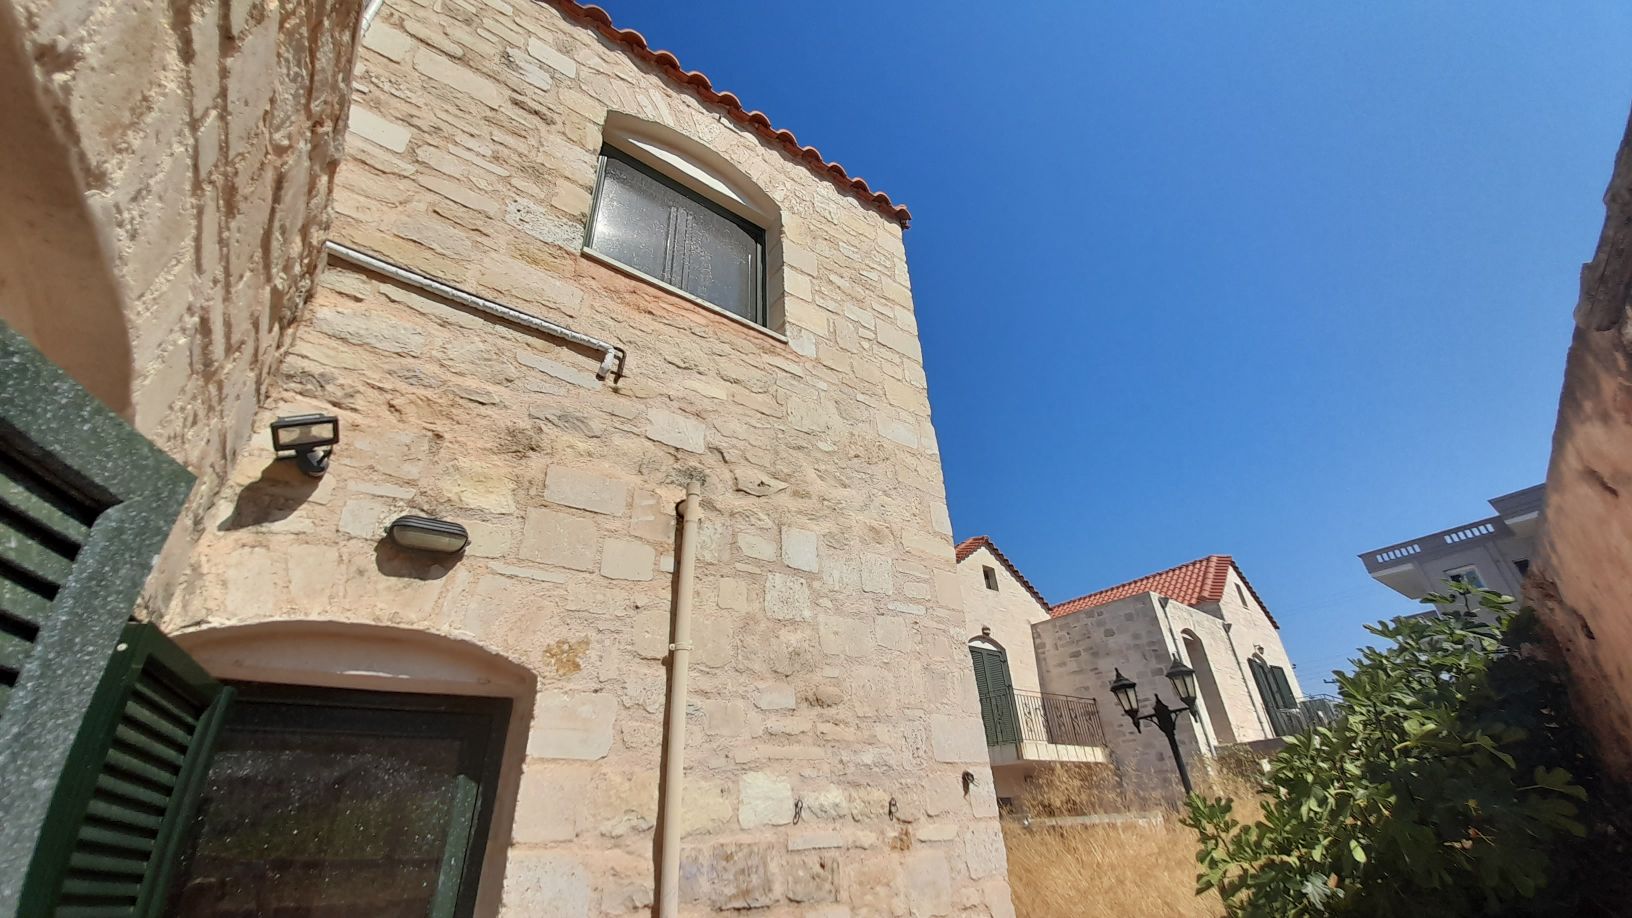 stone house for sale in Chania - Real estate sale in Chania - Atlas Real Estate office in Chania, Crete